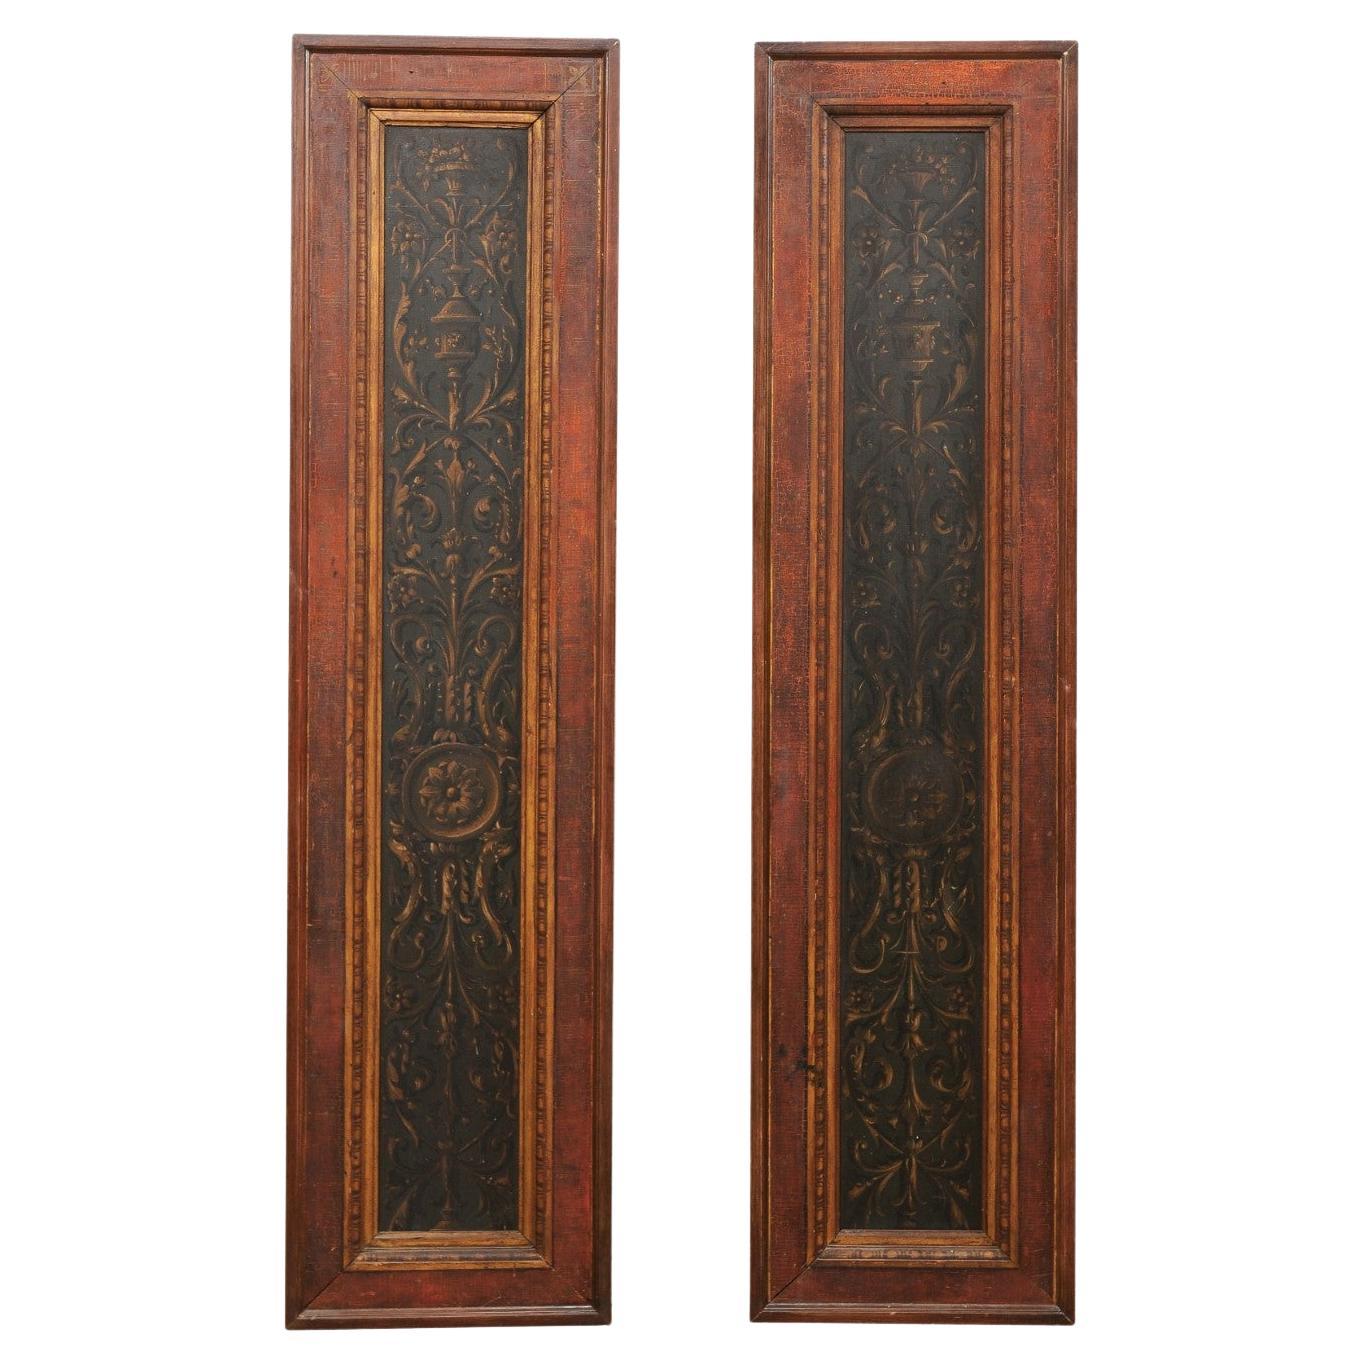 19th Century French Pair of Decoratively Hand-Painted Wooden Wall Panels